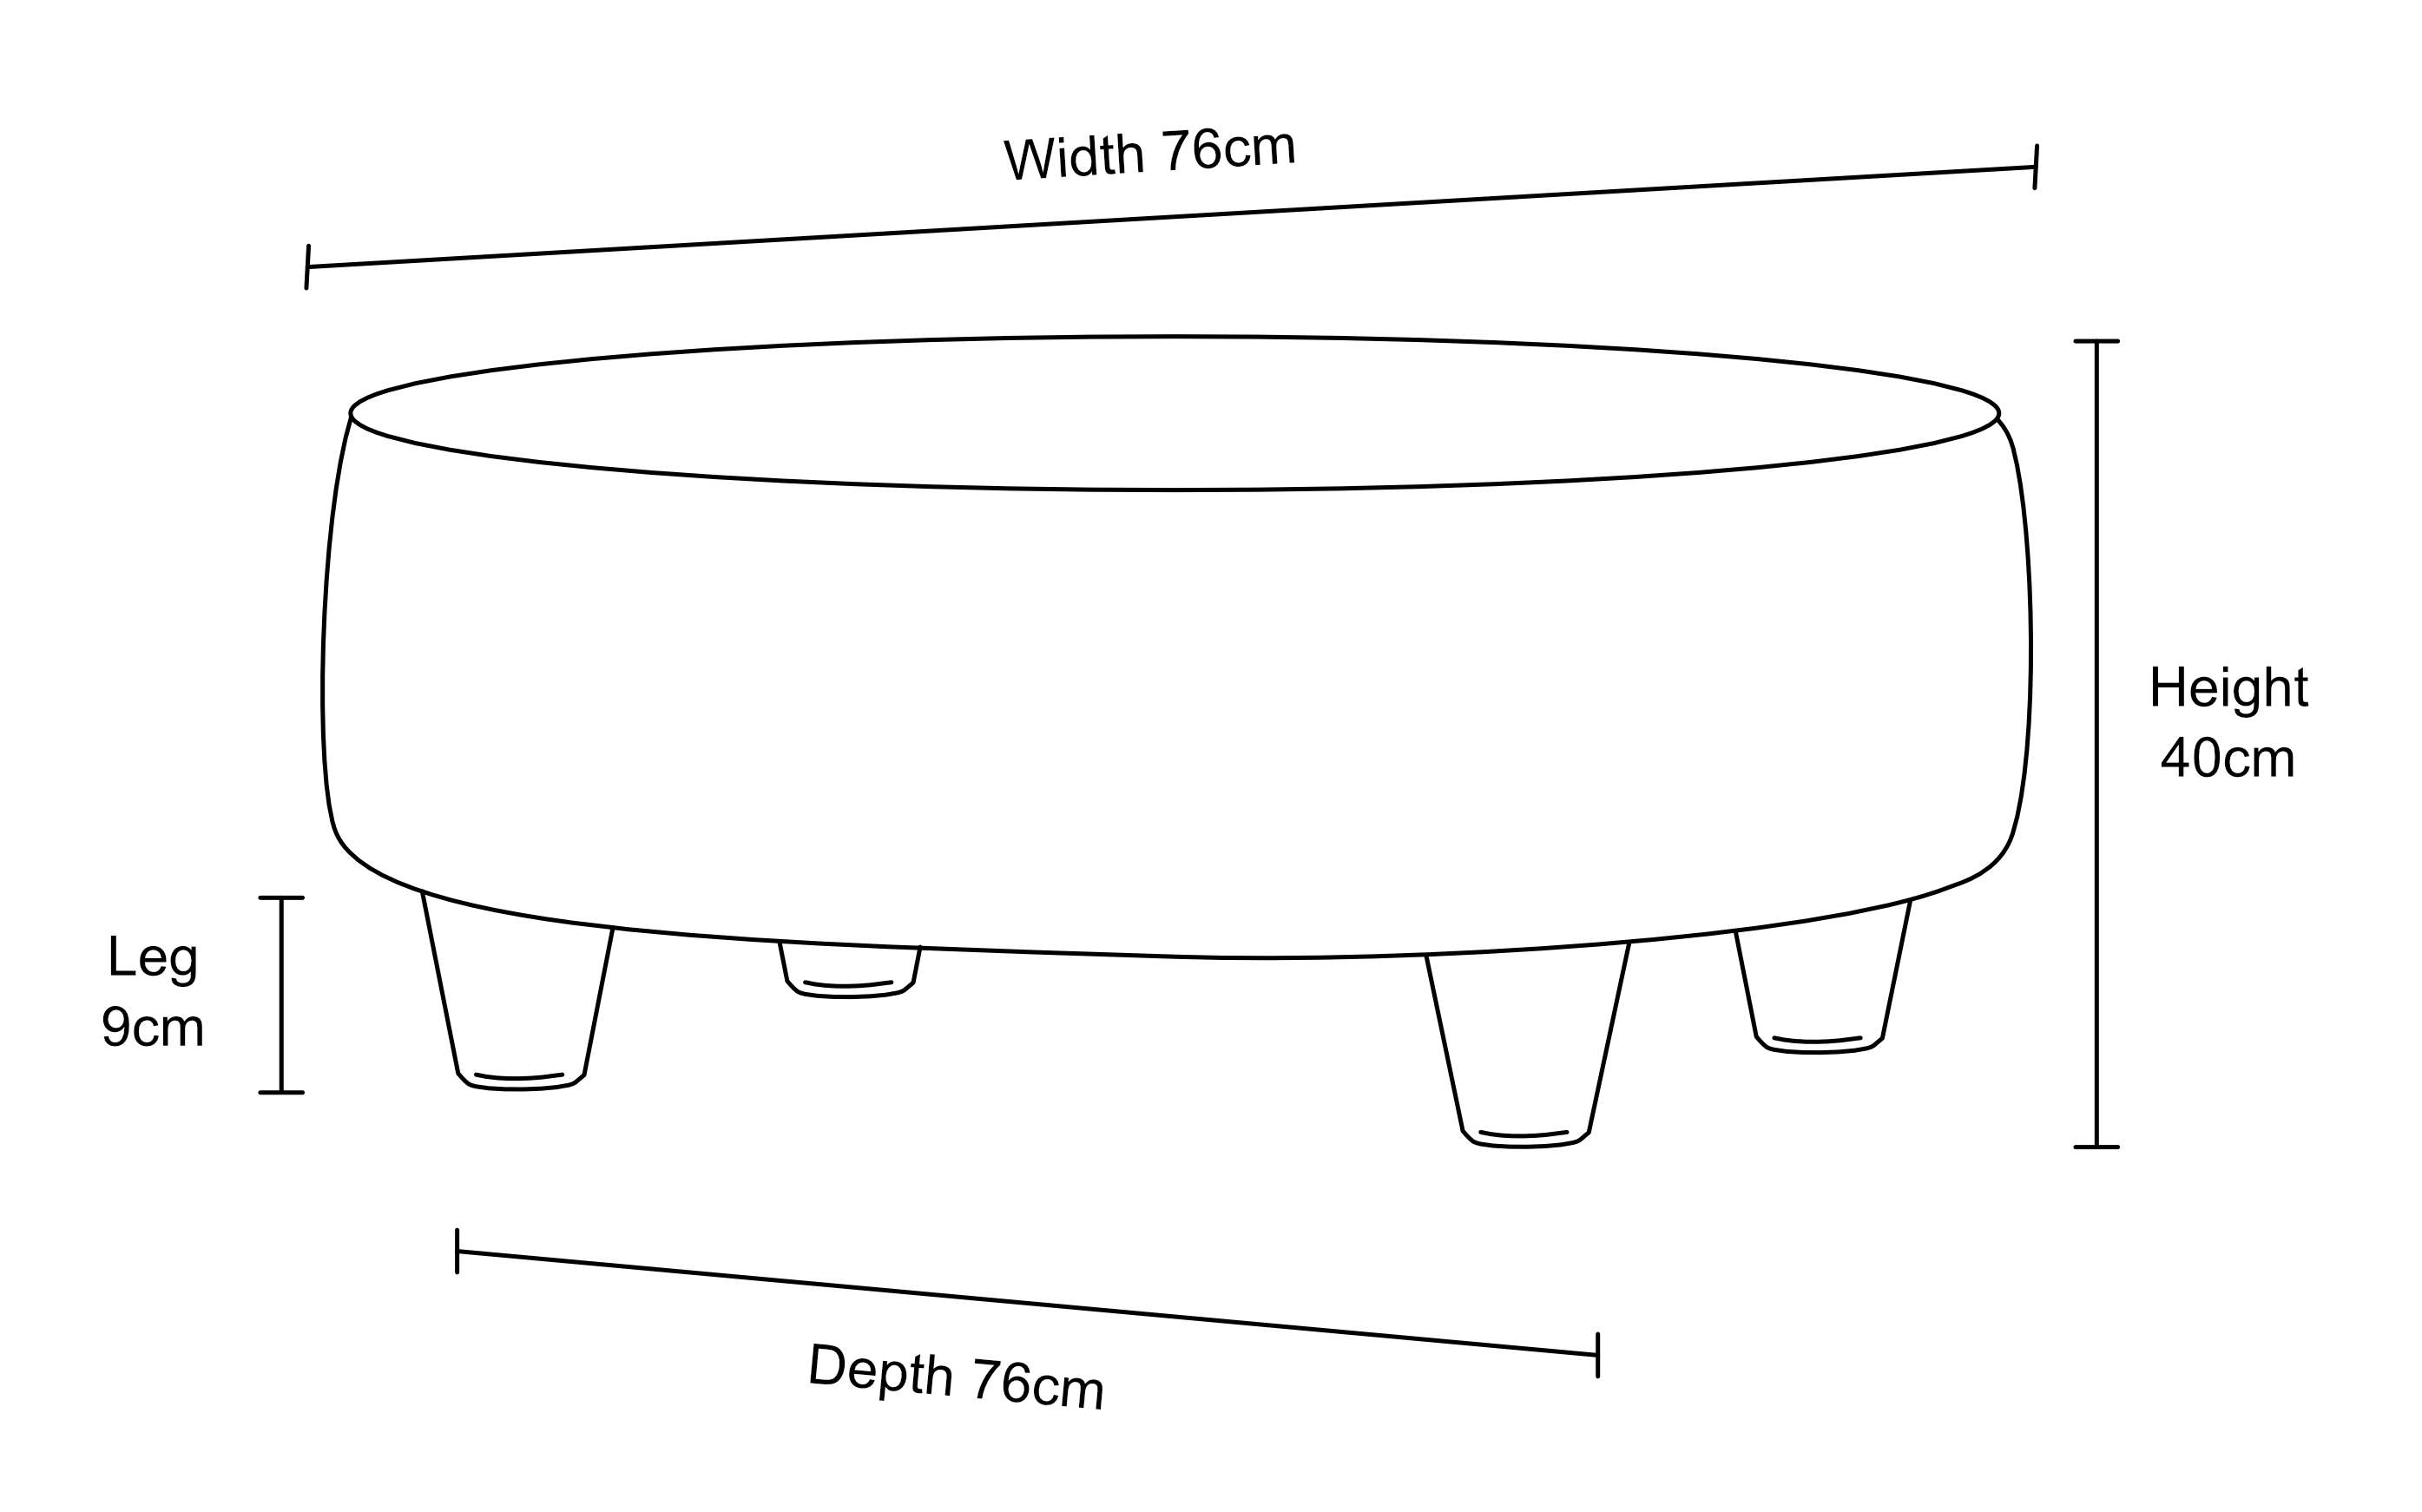 https://www.footstools.co.uk/wp-content/uploads/round-footstool-30x30-dimensions.jpg